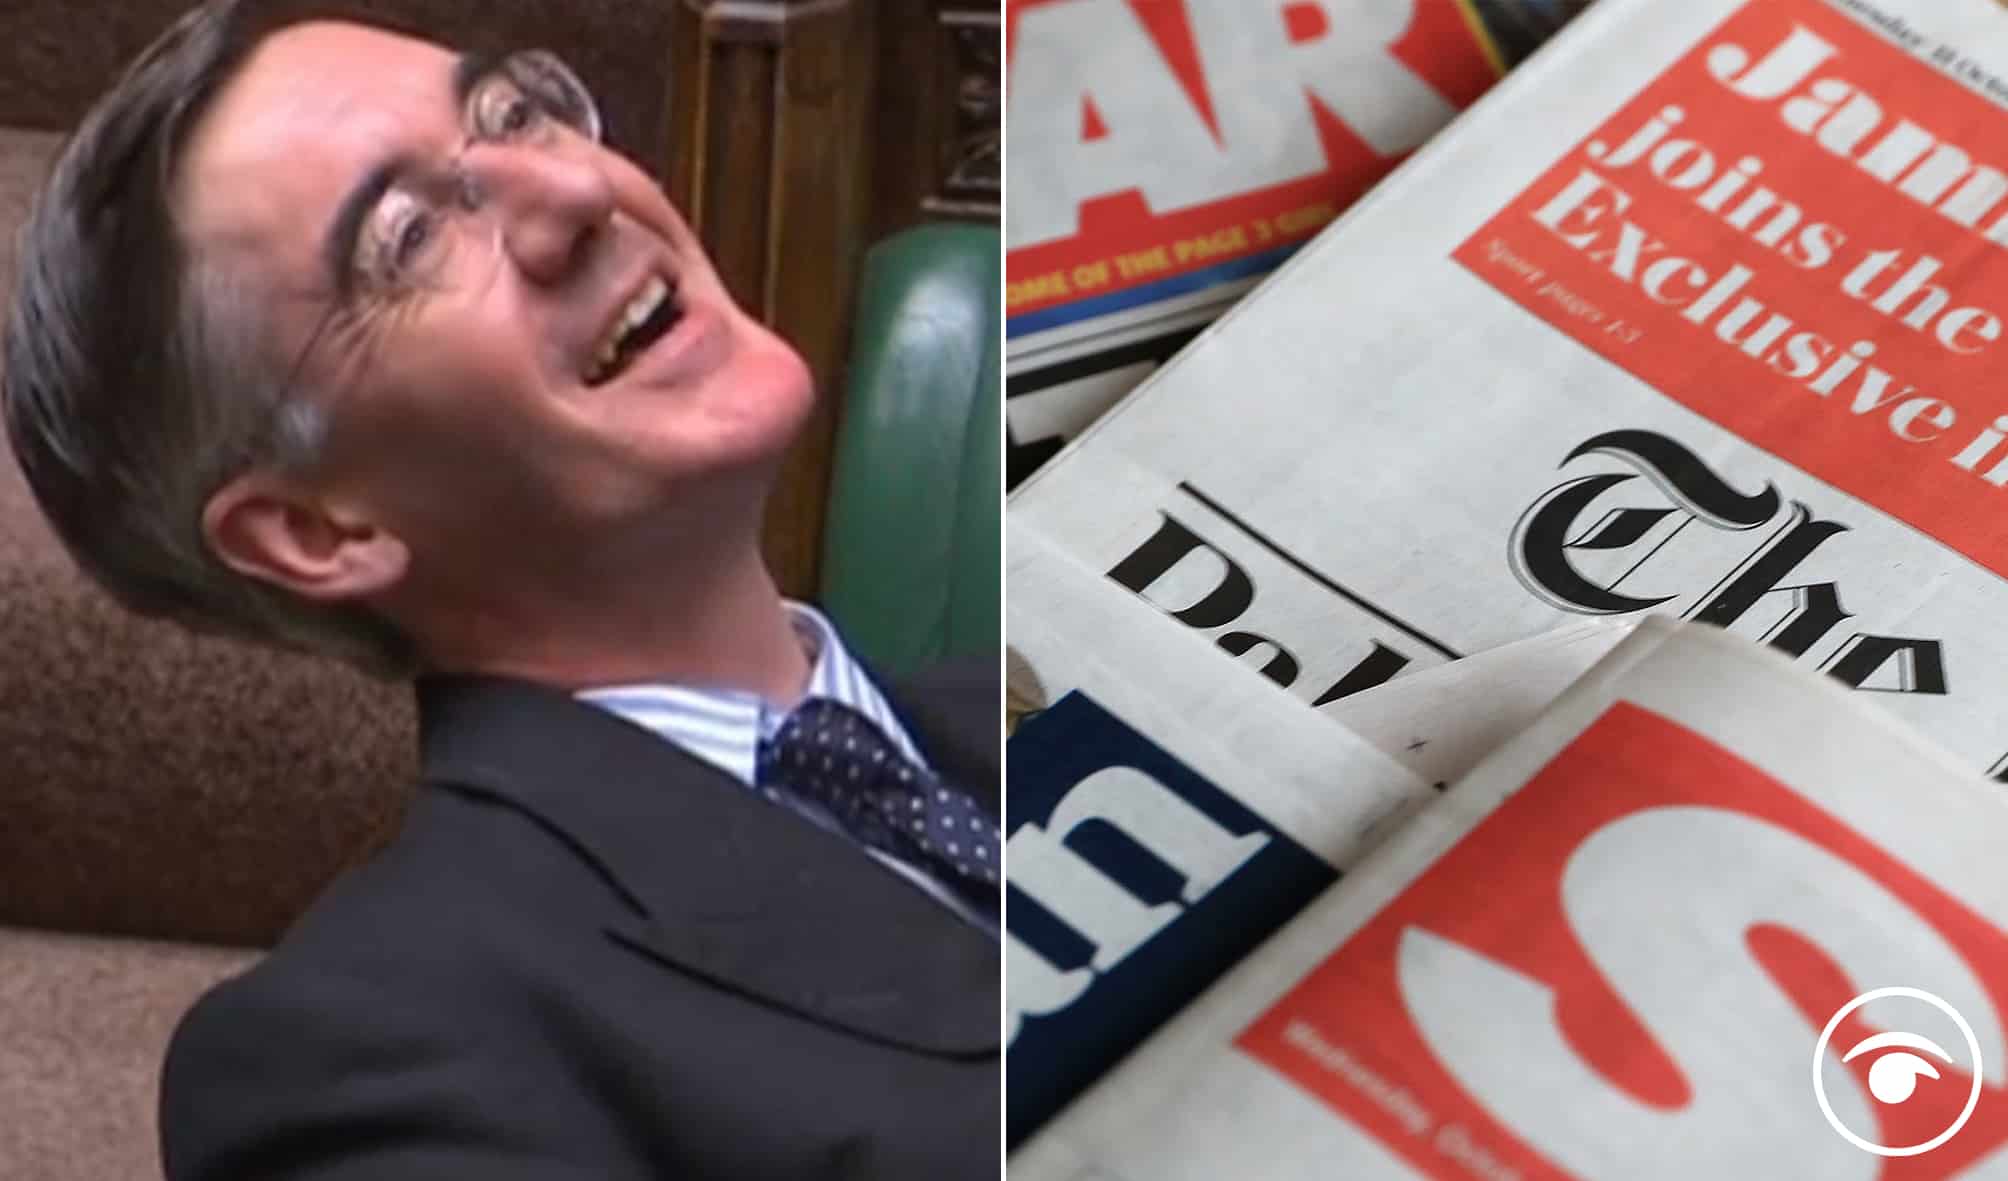 Listen for yourself: Rees-Mogg under fire after using parliamentary privilege to ‘smear’ journalist